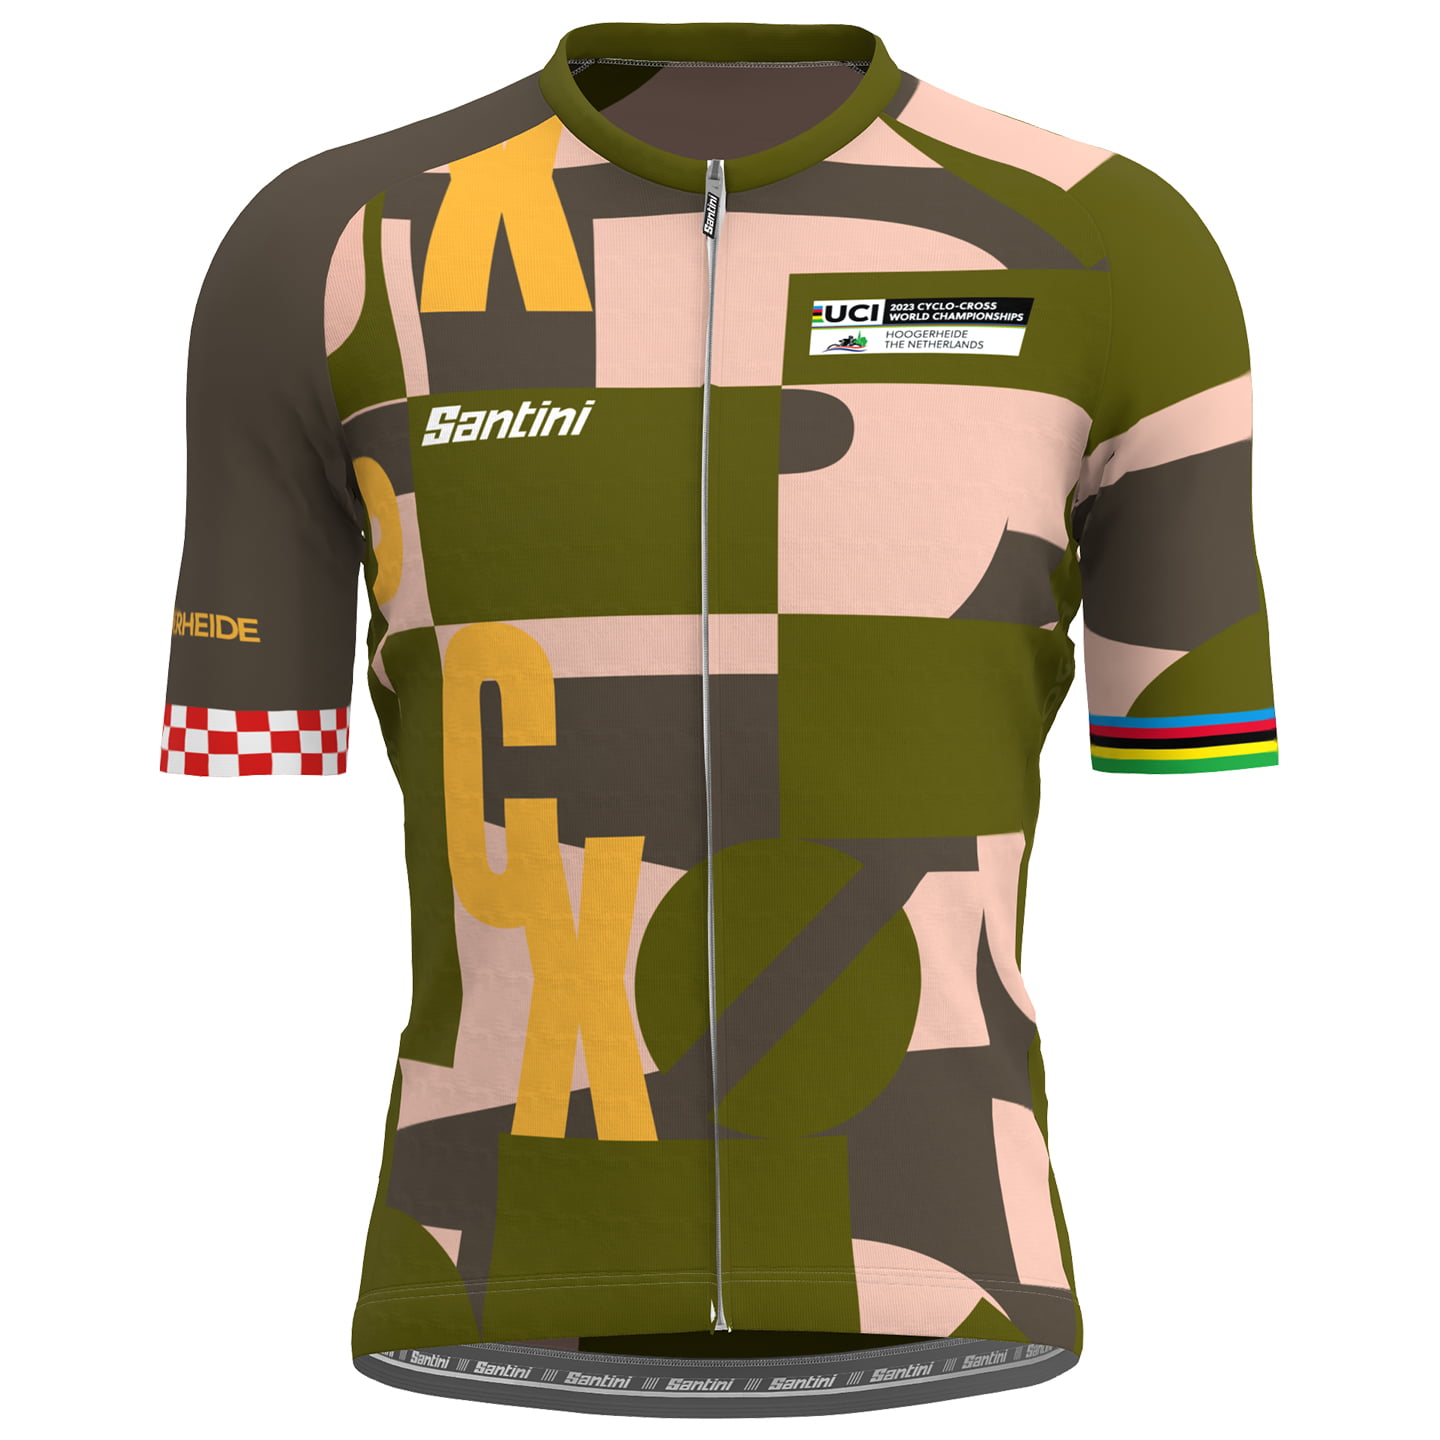 UCI WORLD CHAMPION Cyclo-Cross 2023 Short Sleeve Jersey, for men, size L, Cycling shirt, Cycle clothing